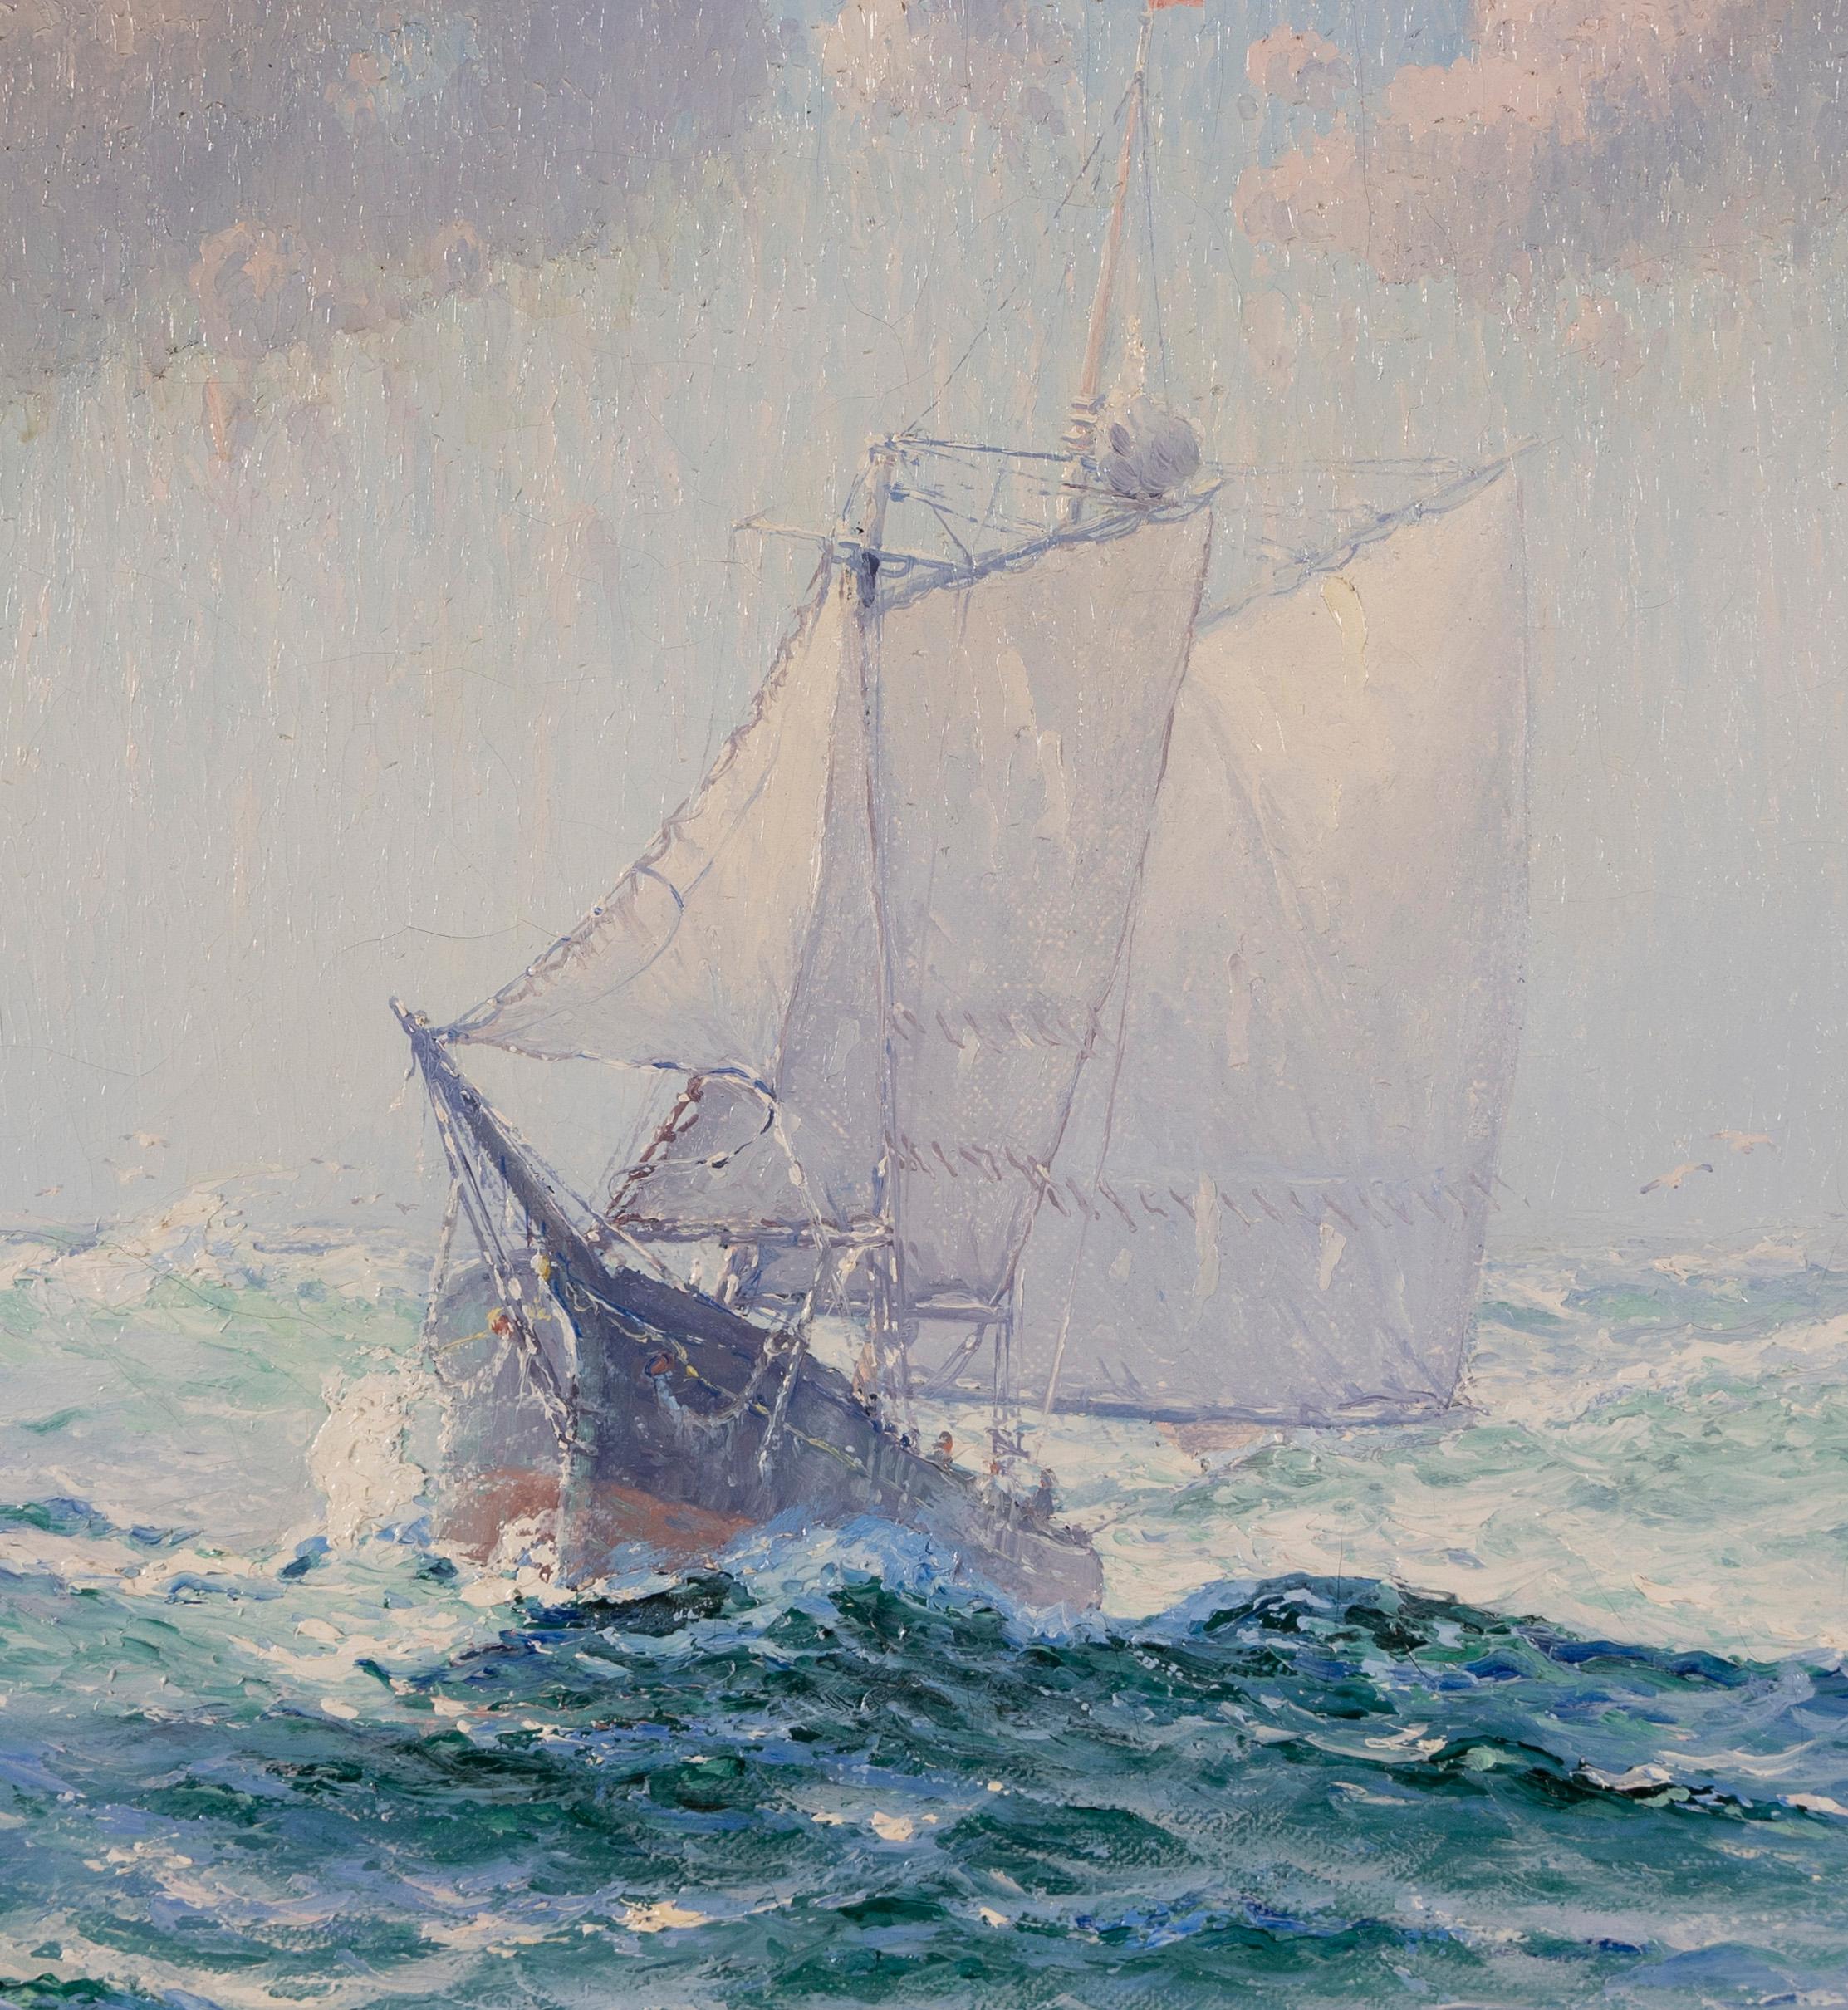 Antique American impressionist seascape painting by Theodore Victor Carl Valenkamph (1868 - 1924).  Oil on canvas, circa 1900.  Unterschrieben.  Image size 20L x 18H.  Housed in a period giltwood frame.